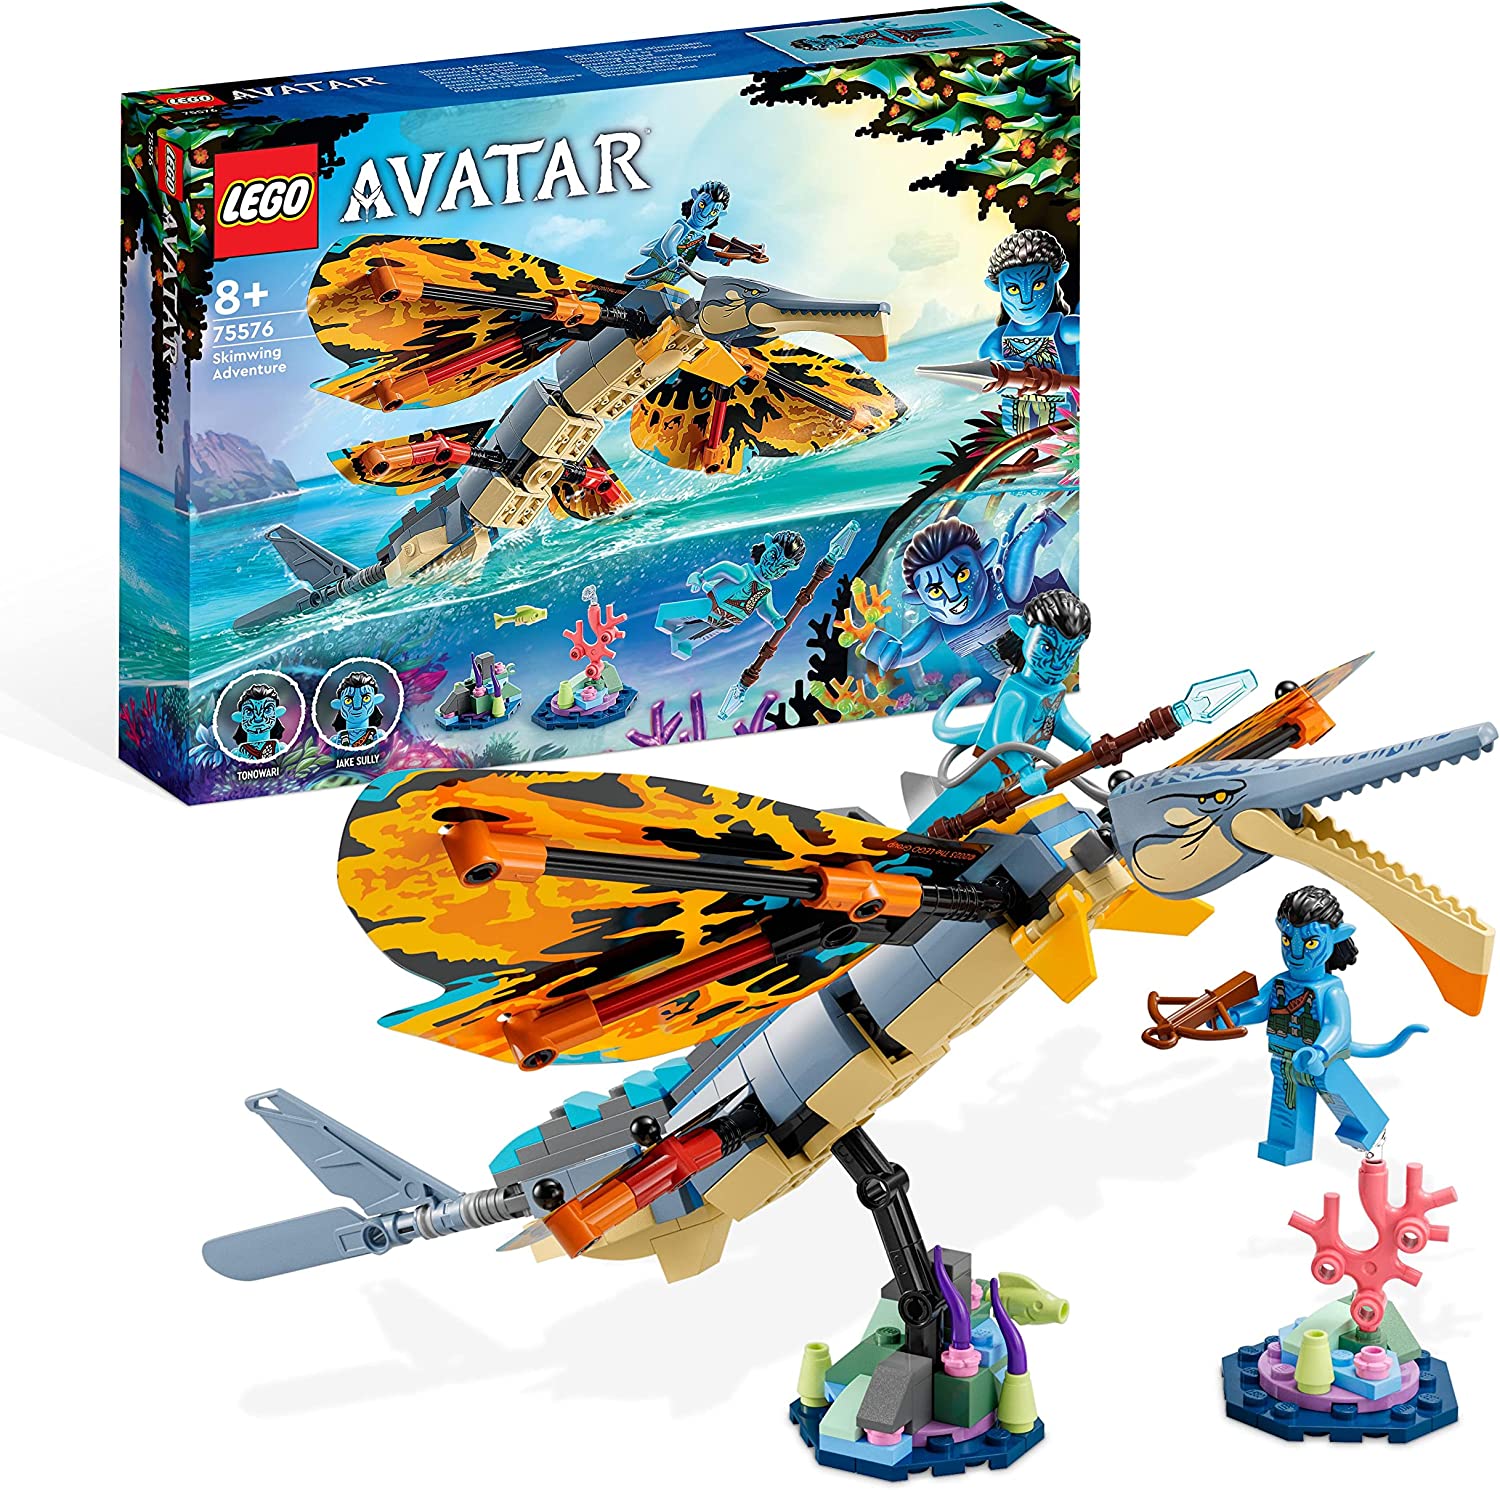 LEGO 75576 Avatar Skimwing Adventure, 2022 Avatar: The Way of Water Collectible for Boys and Girls, Pandora, Tonowari and Jake Sully Mini Figures